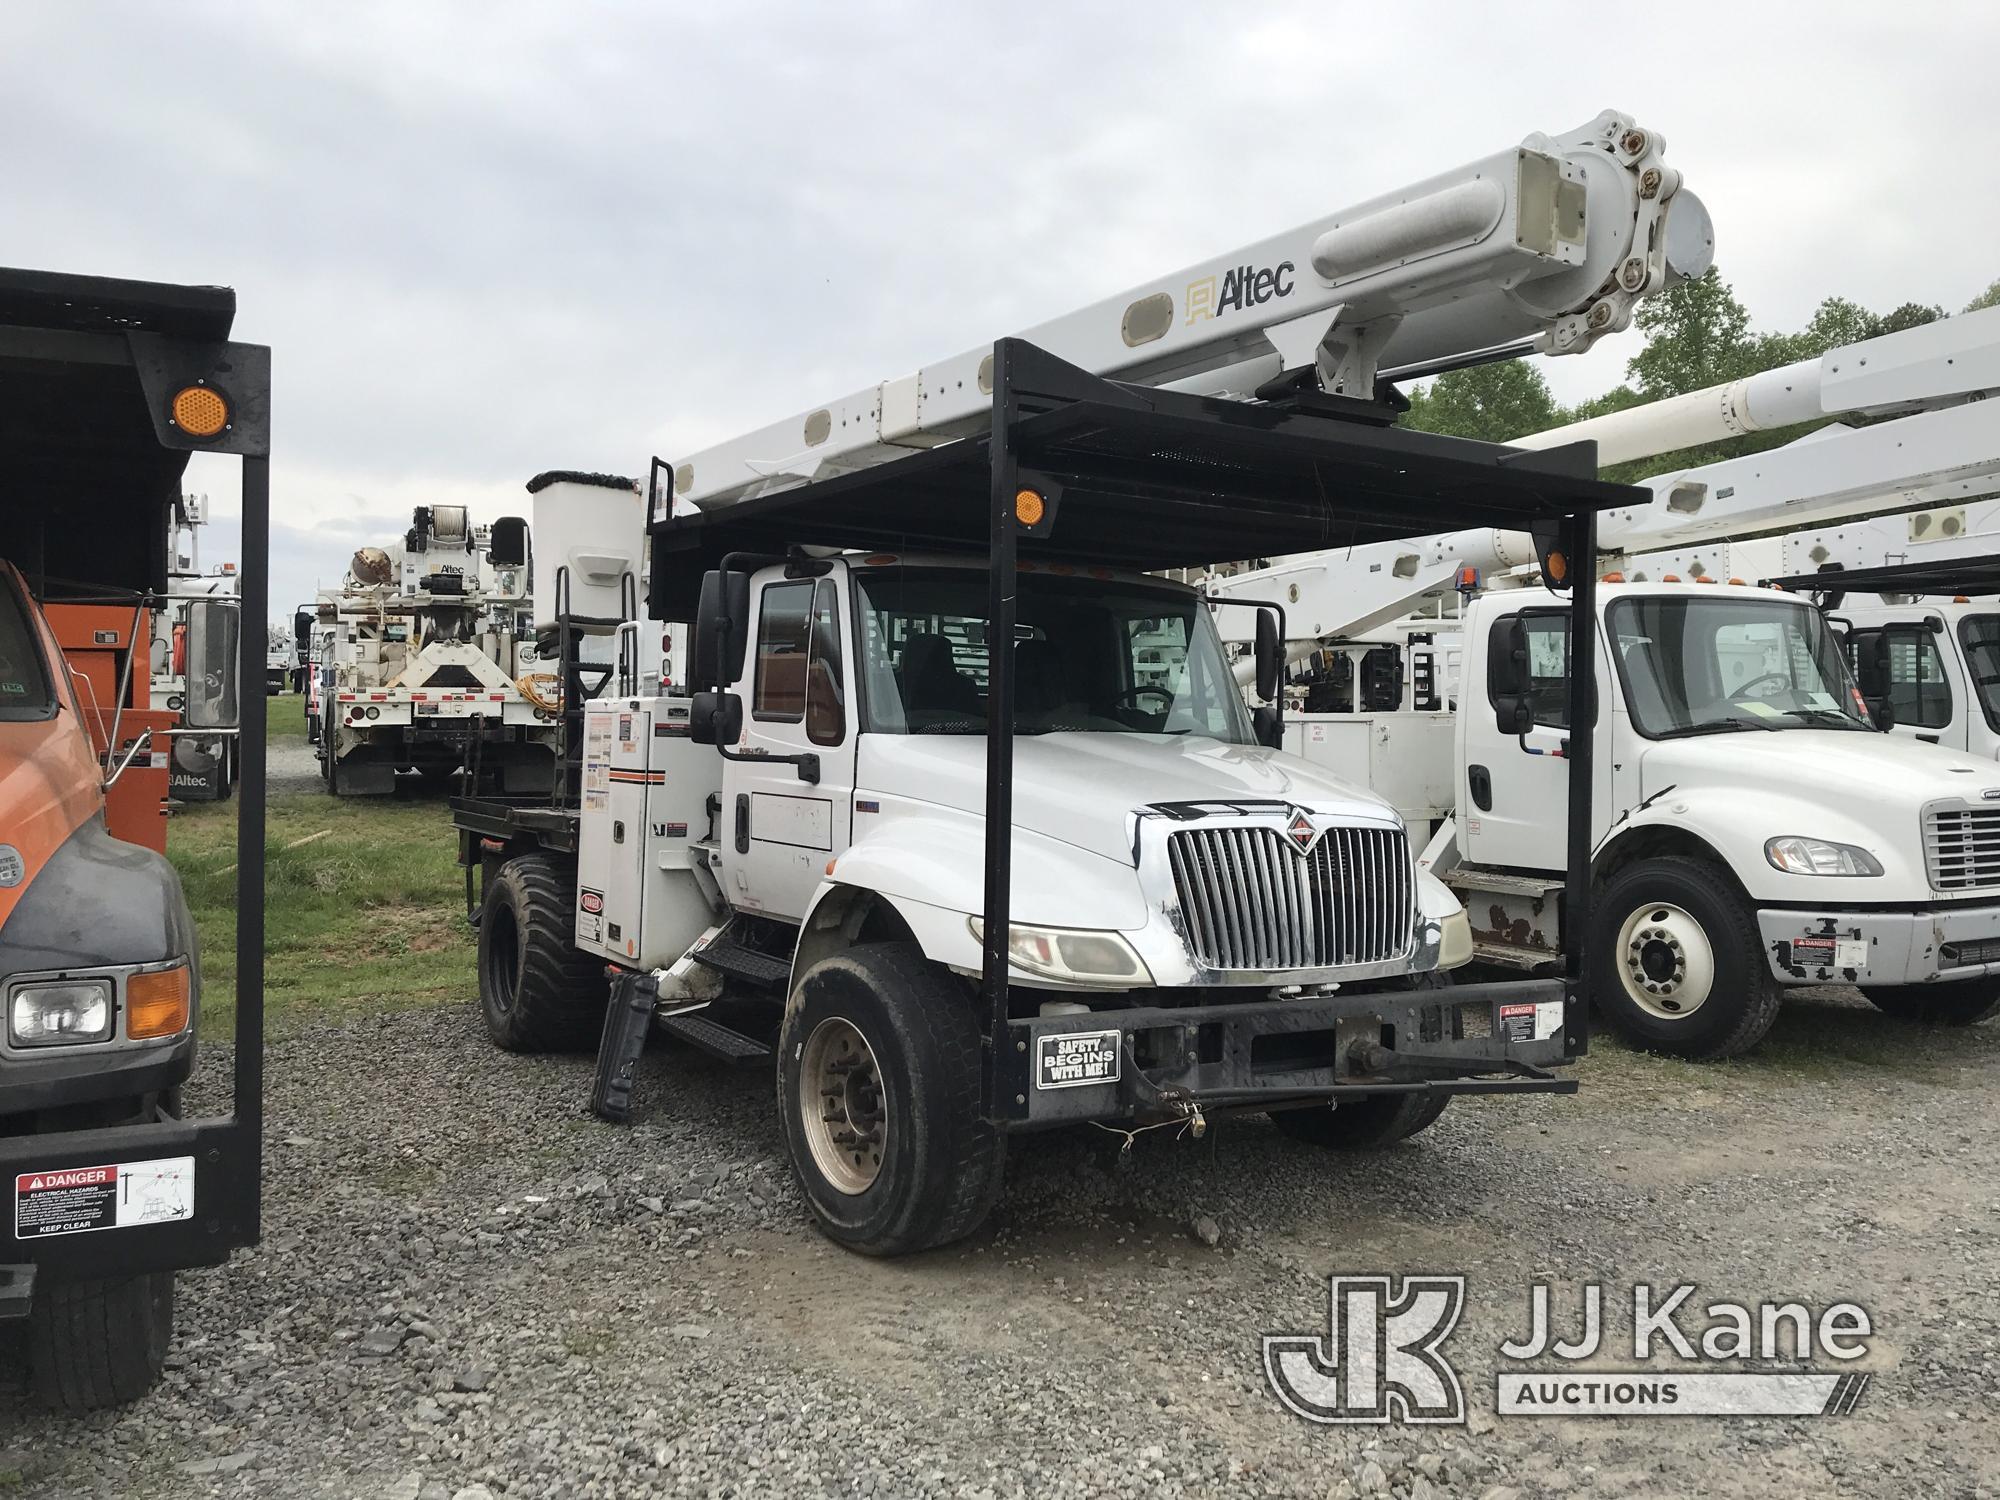 (Mount Airy, NC) Altec LR758RM, Over-Center Bucket Truck rear mounted on 2013 International 4300 Fla